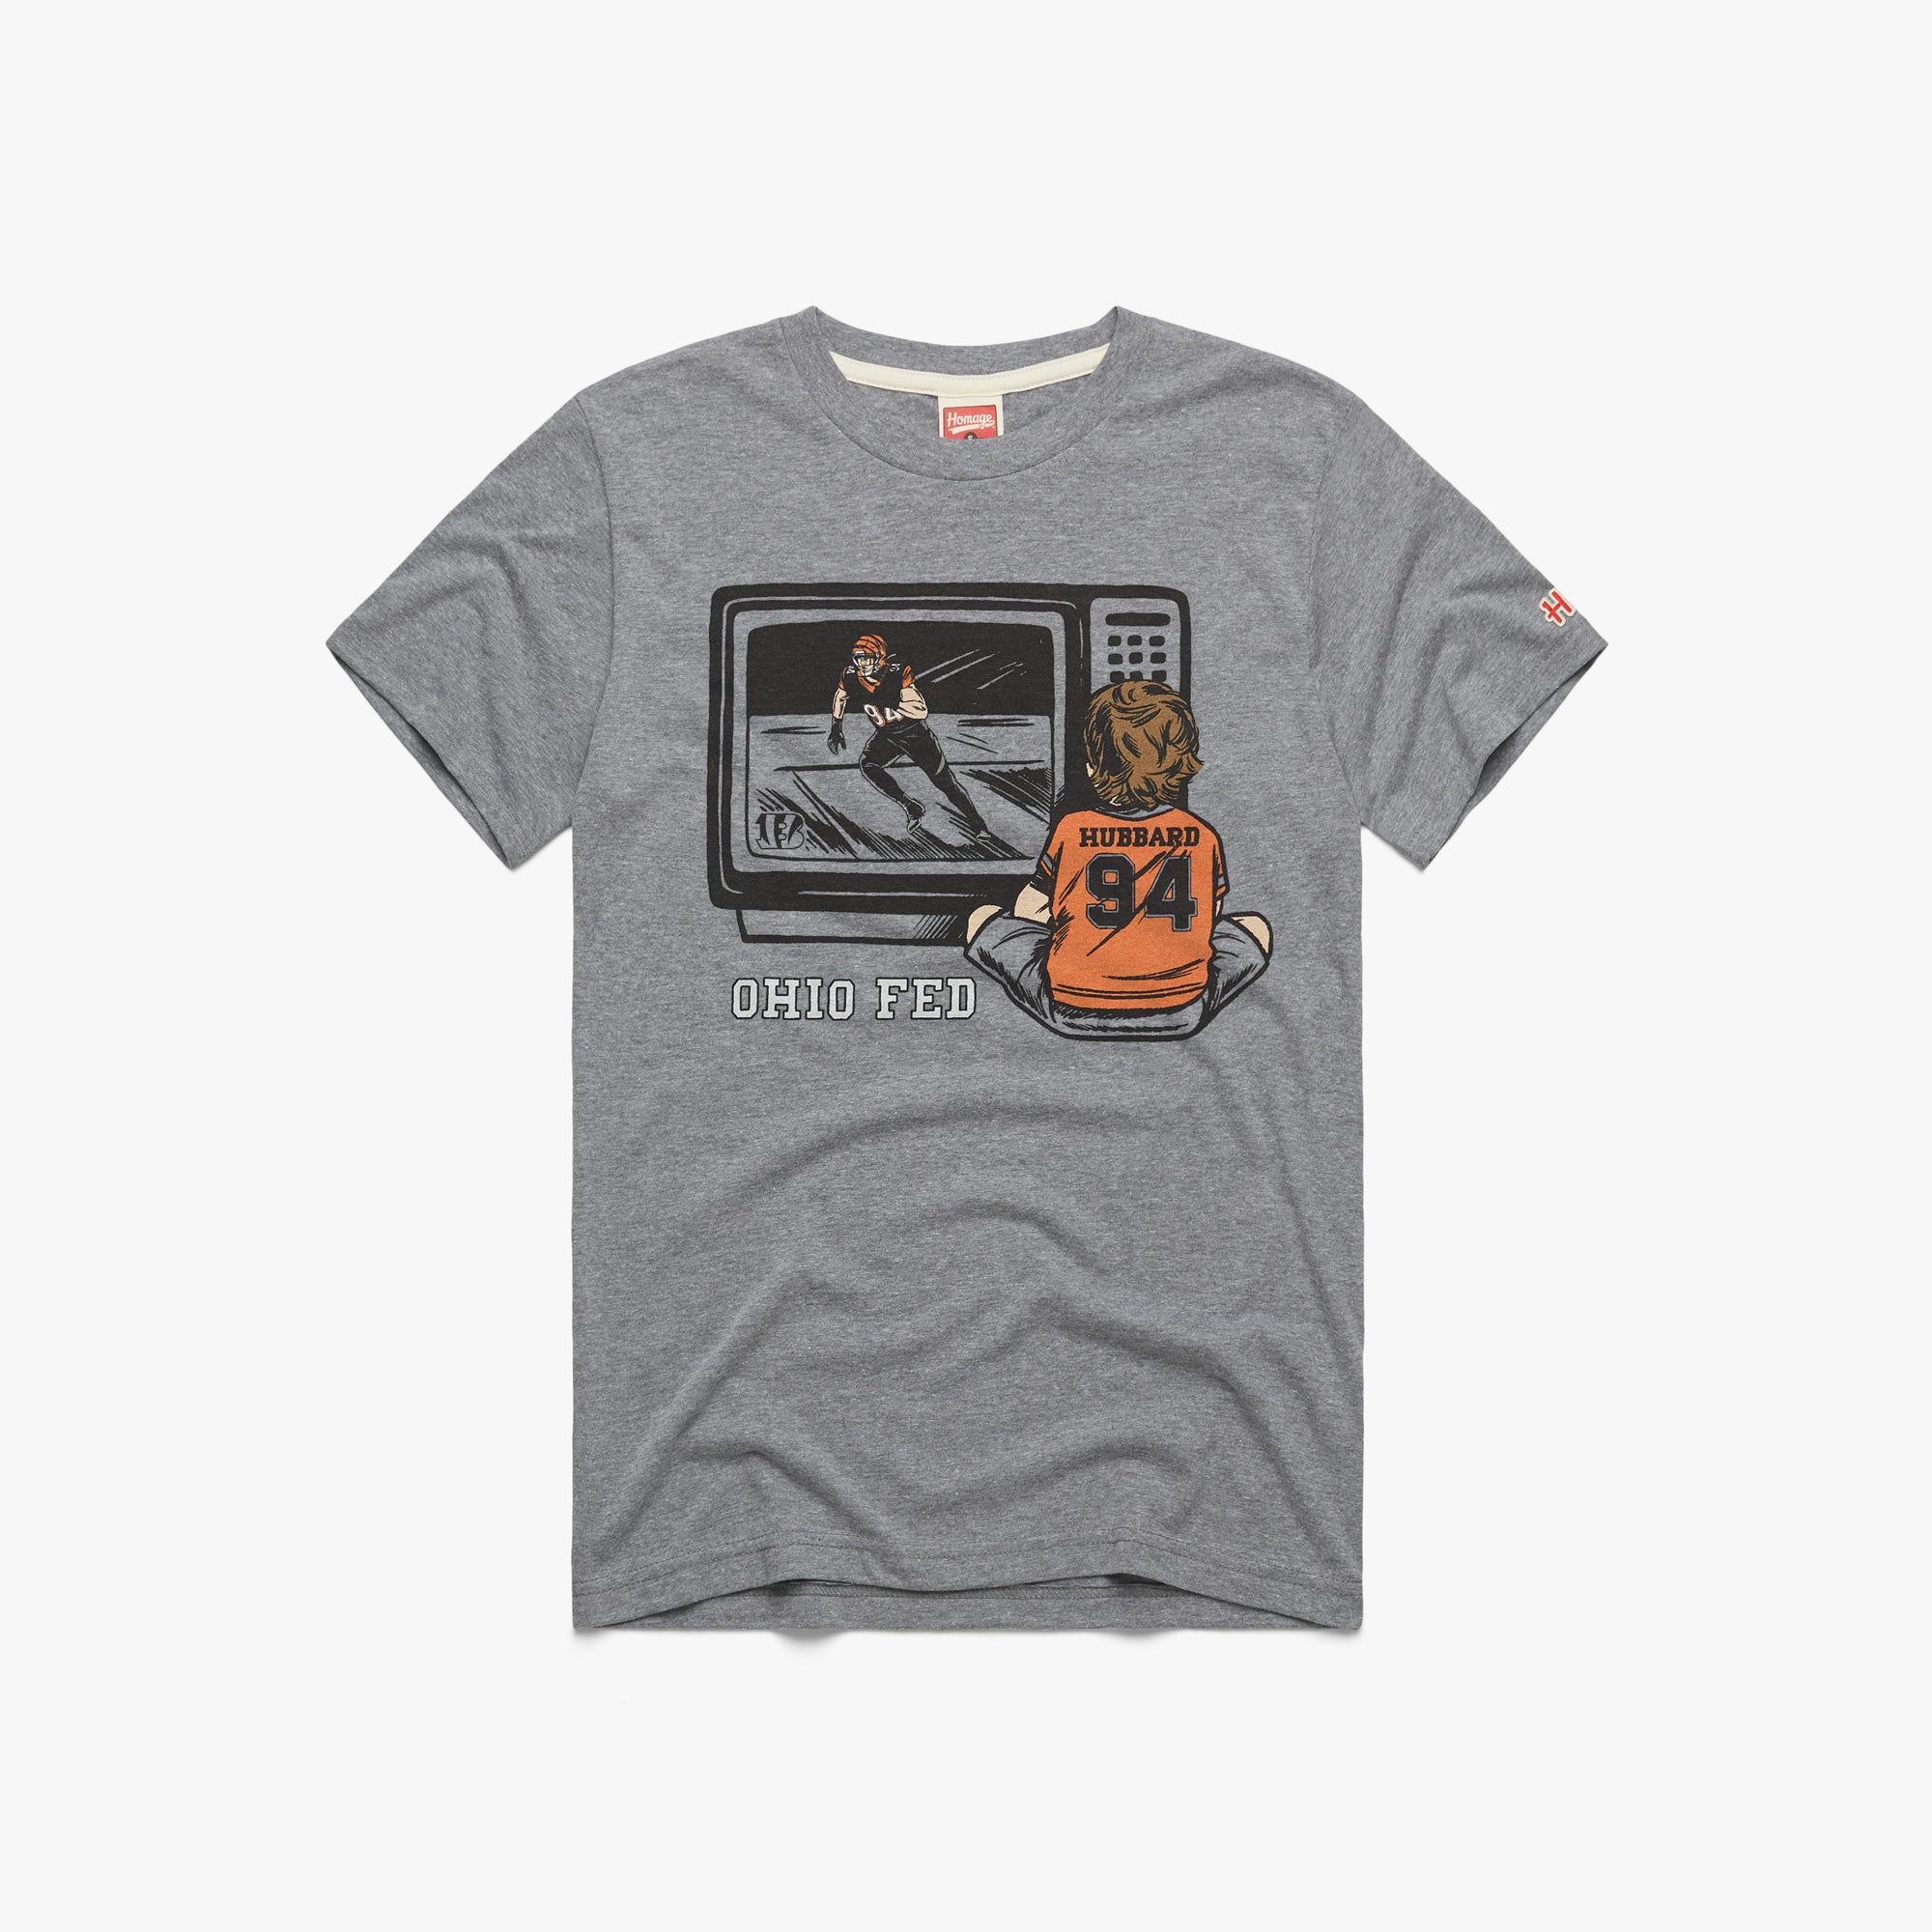 Sam Hubbard Ohio Fed T-Shirt from Homage. | Officially Licensed Vintage NFL Apparel from Homage Pro Shop.